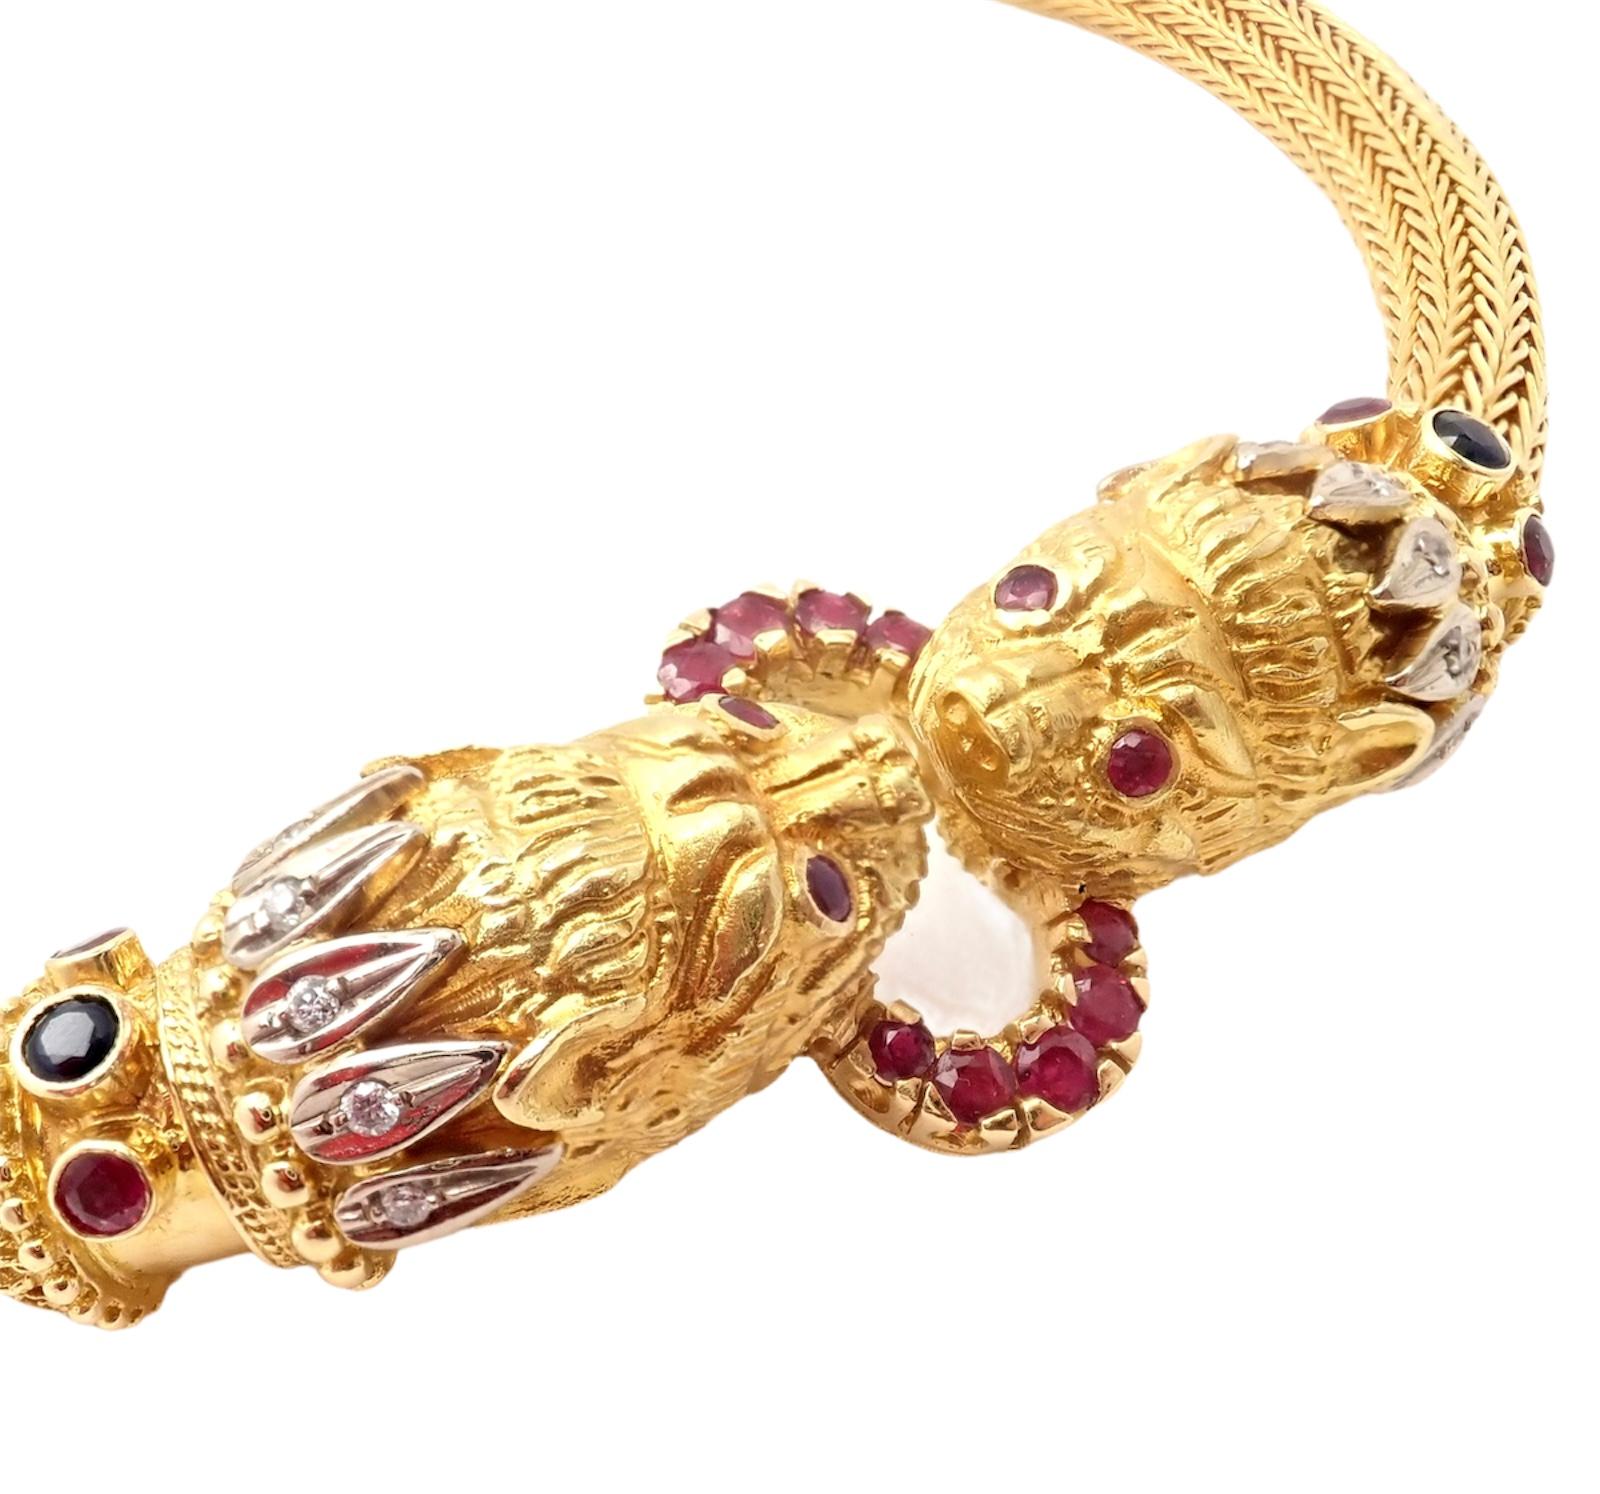 18k Yellow Gold Diamond Ruby Sapphire Chimera Collar Necklace by Ilias Lalaounis Greece.
With 2x Sapphires
12x Diamonds
18x Rubies
Details: 
Length 15.5